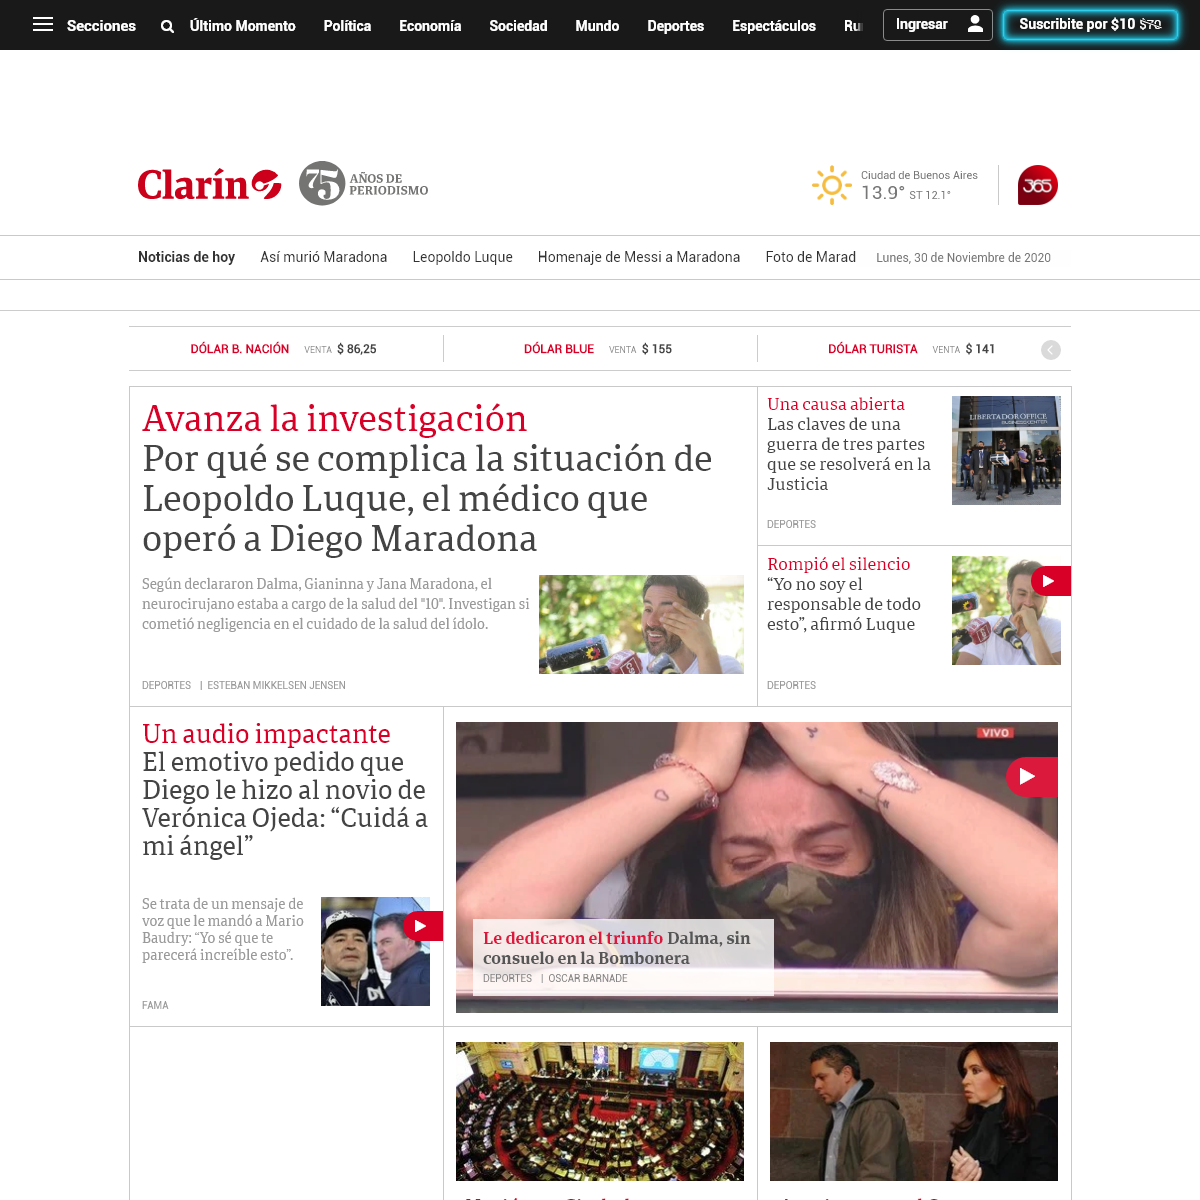 A complete backup of clarin.com.ar